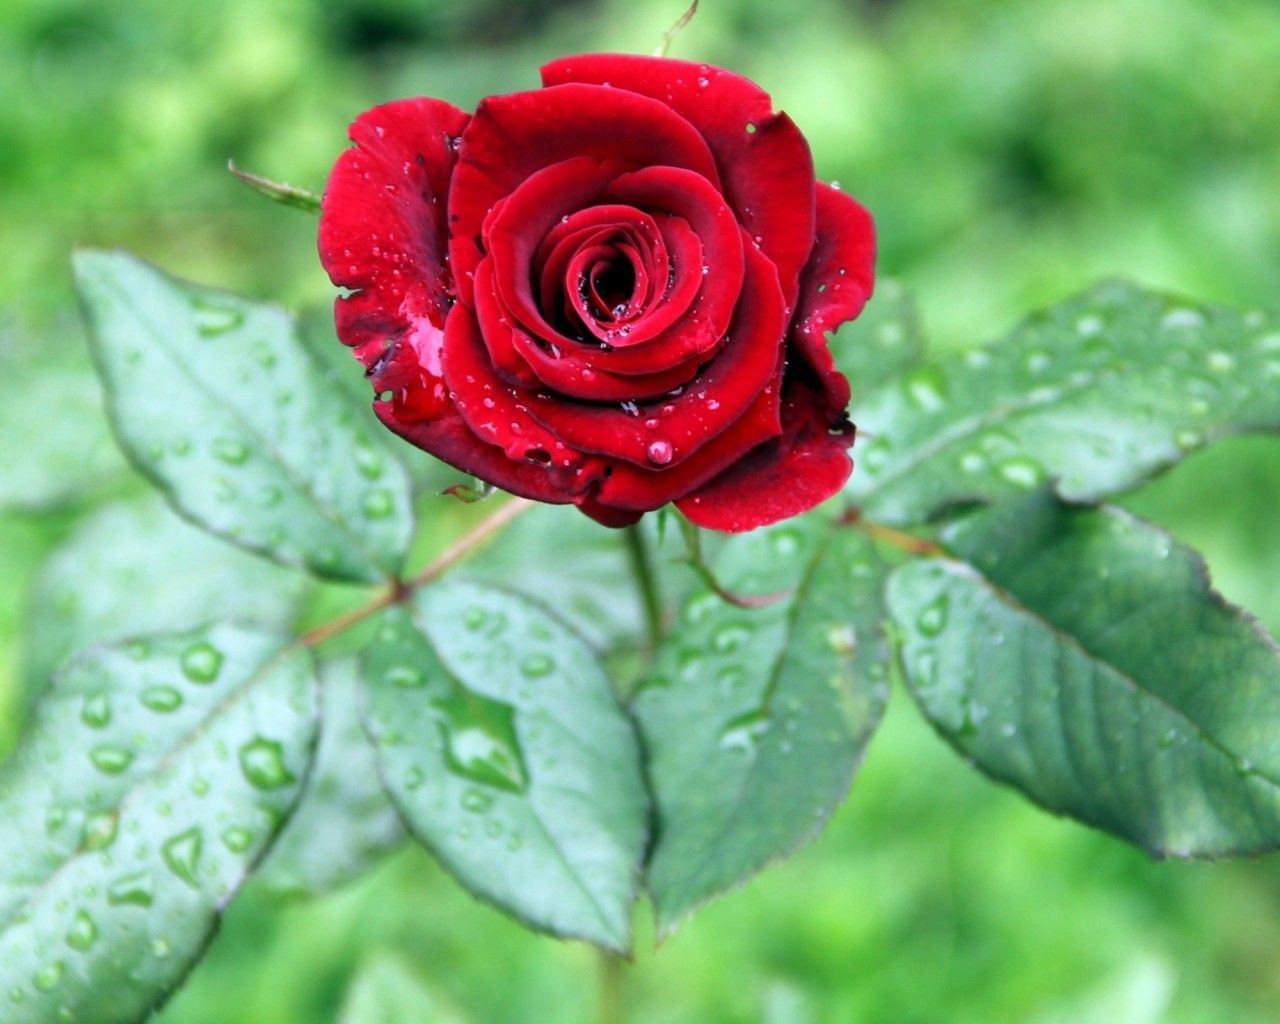 Rose With Water Drops Wallpaper Group 1920×1080 Rose With Water Drops Wallpaper (39 Wallpaper). Adorable Wal. Red rose flower, Rose flower wallpaper, Flowers